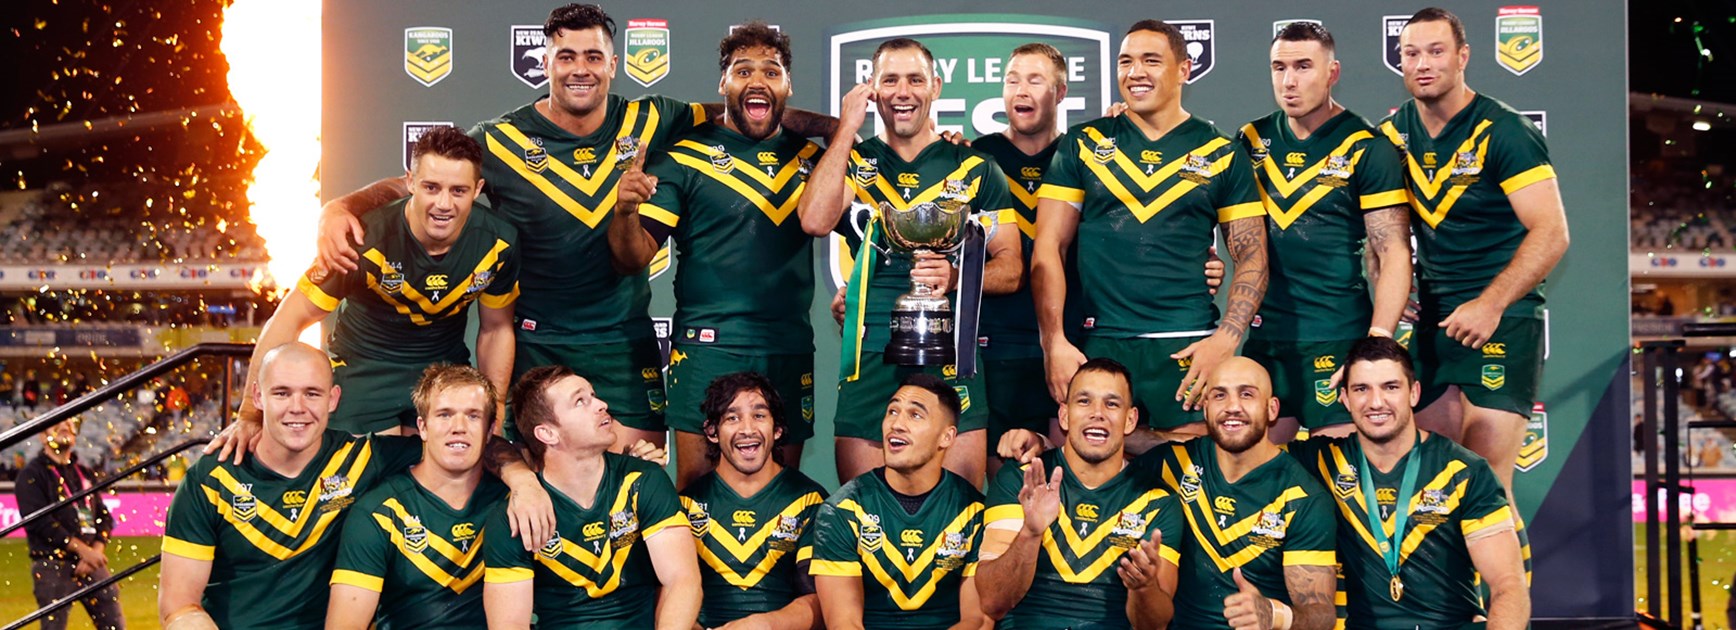 The Kangaroos celebrate their win over New Zealand in this year's mid-year Test.